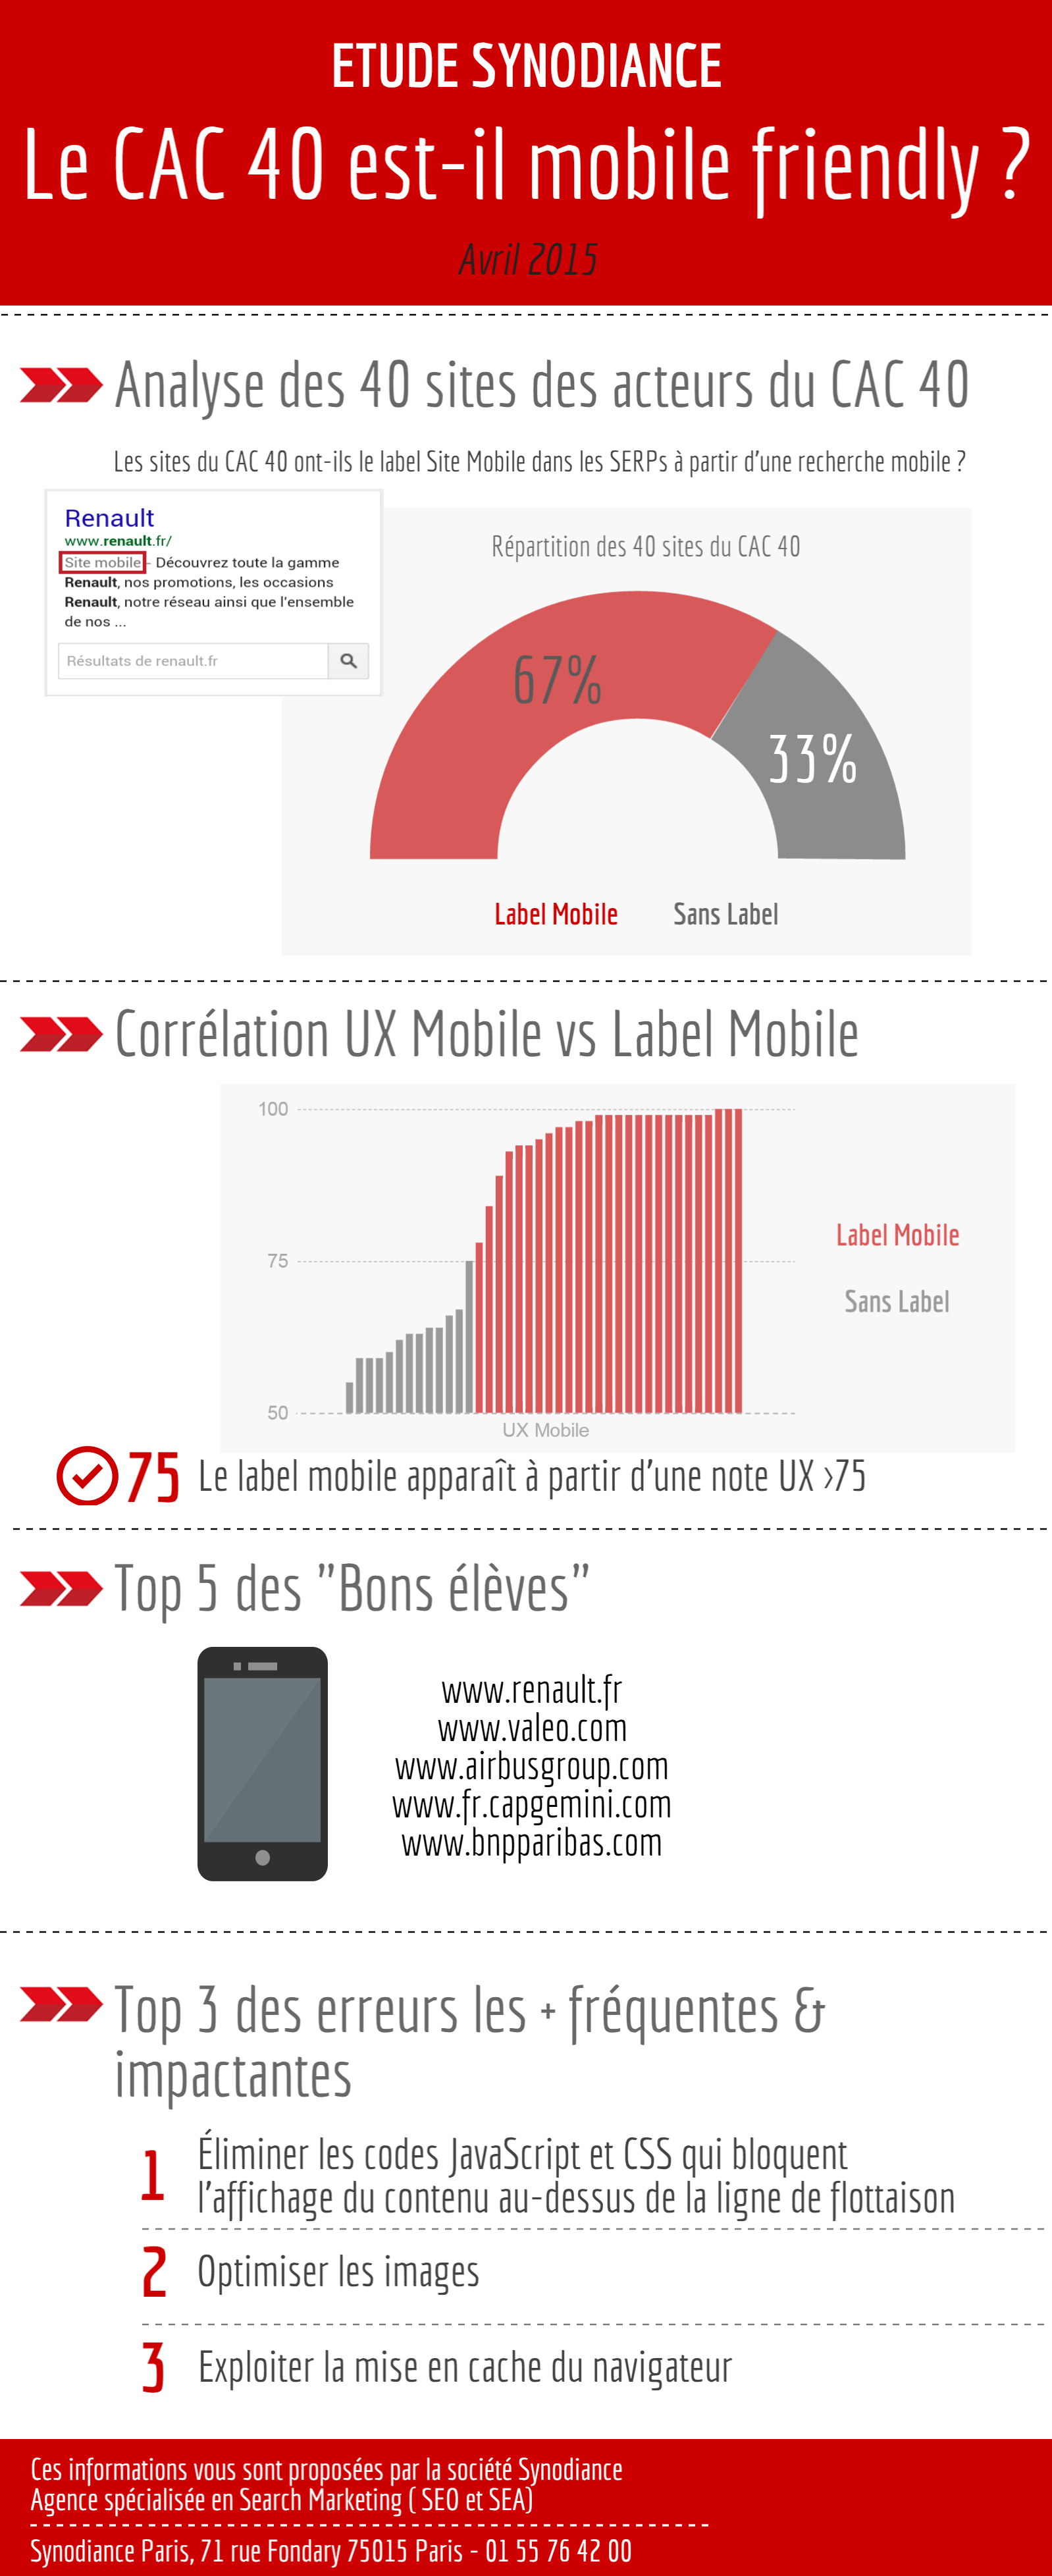 infographie-CAC-40-mobile-friendly